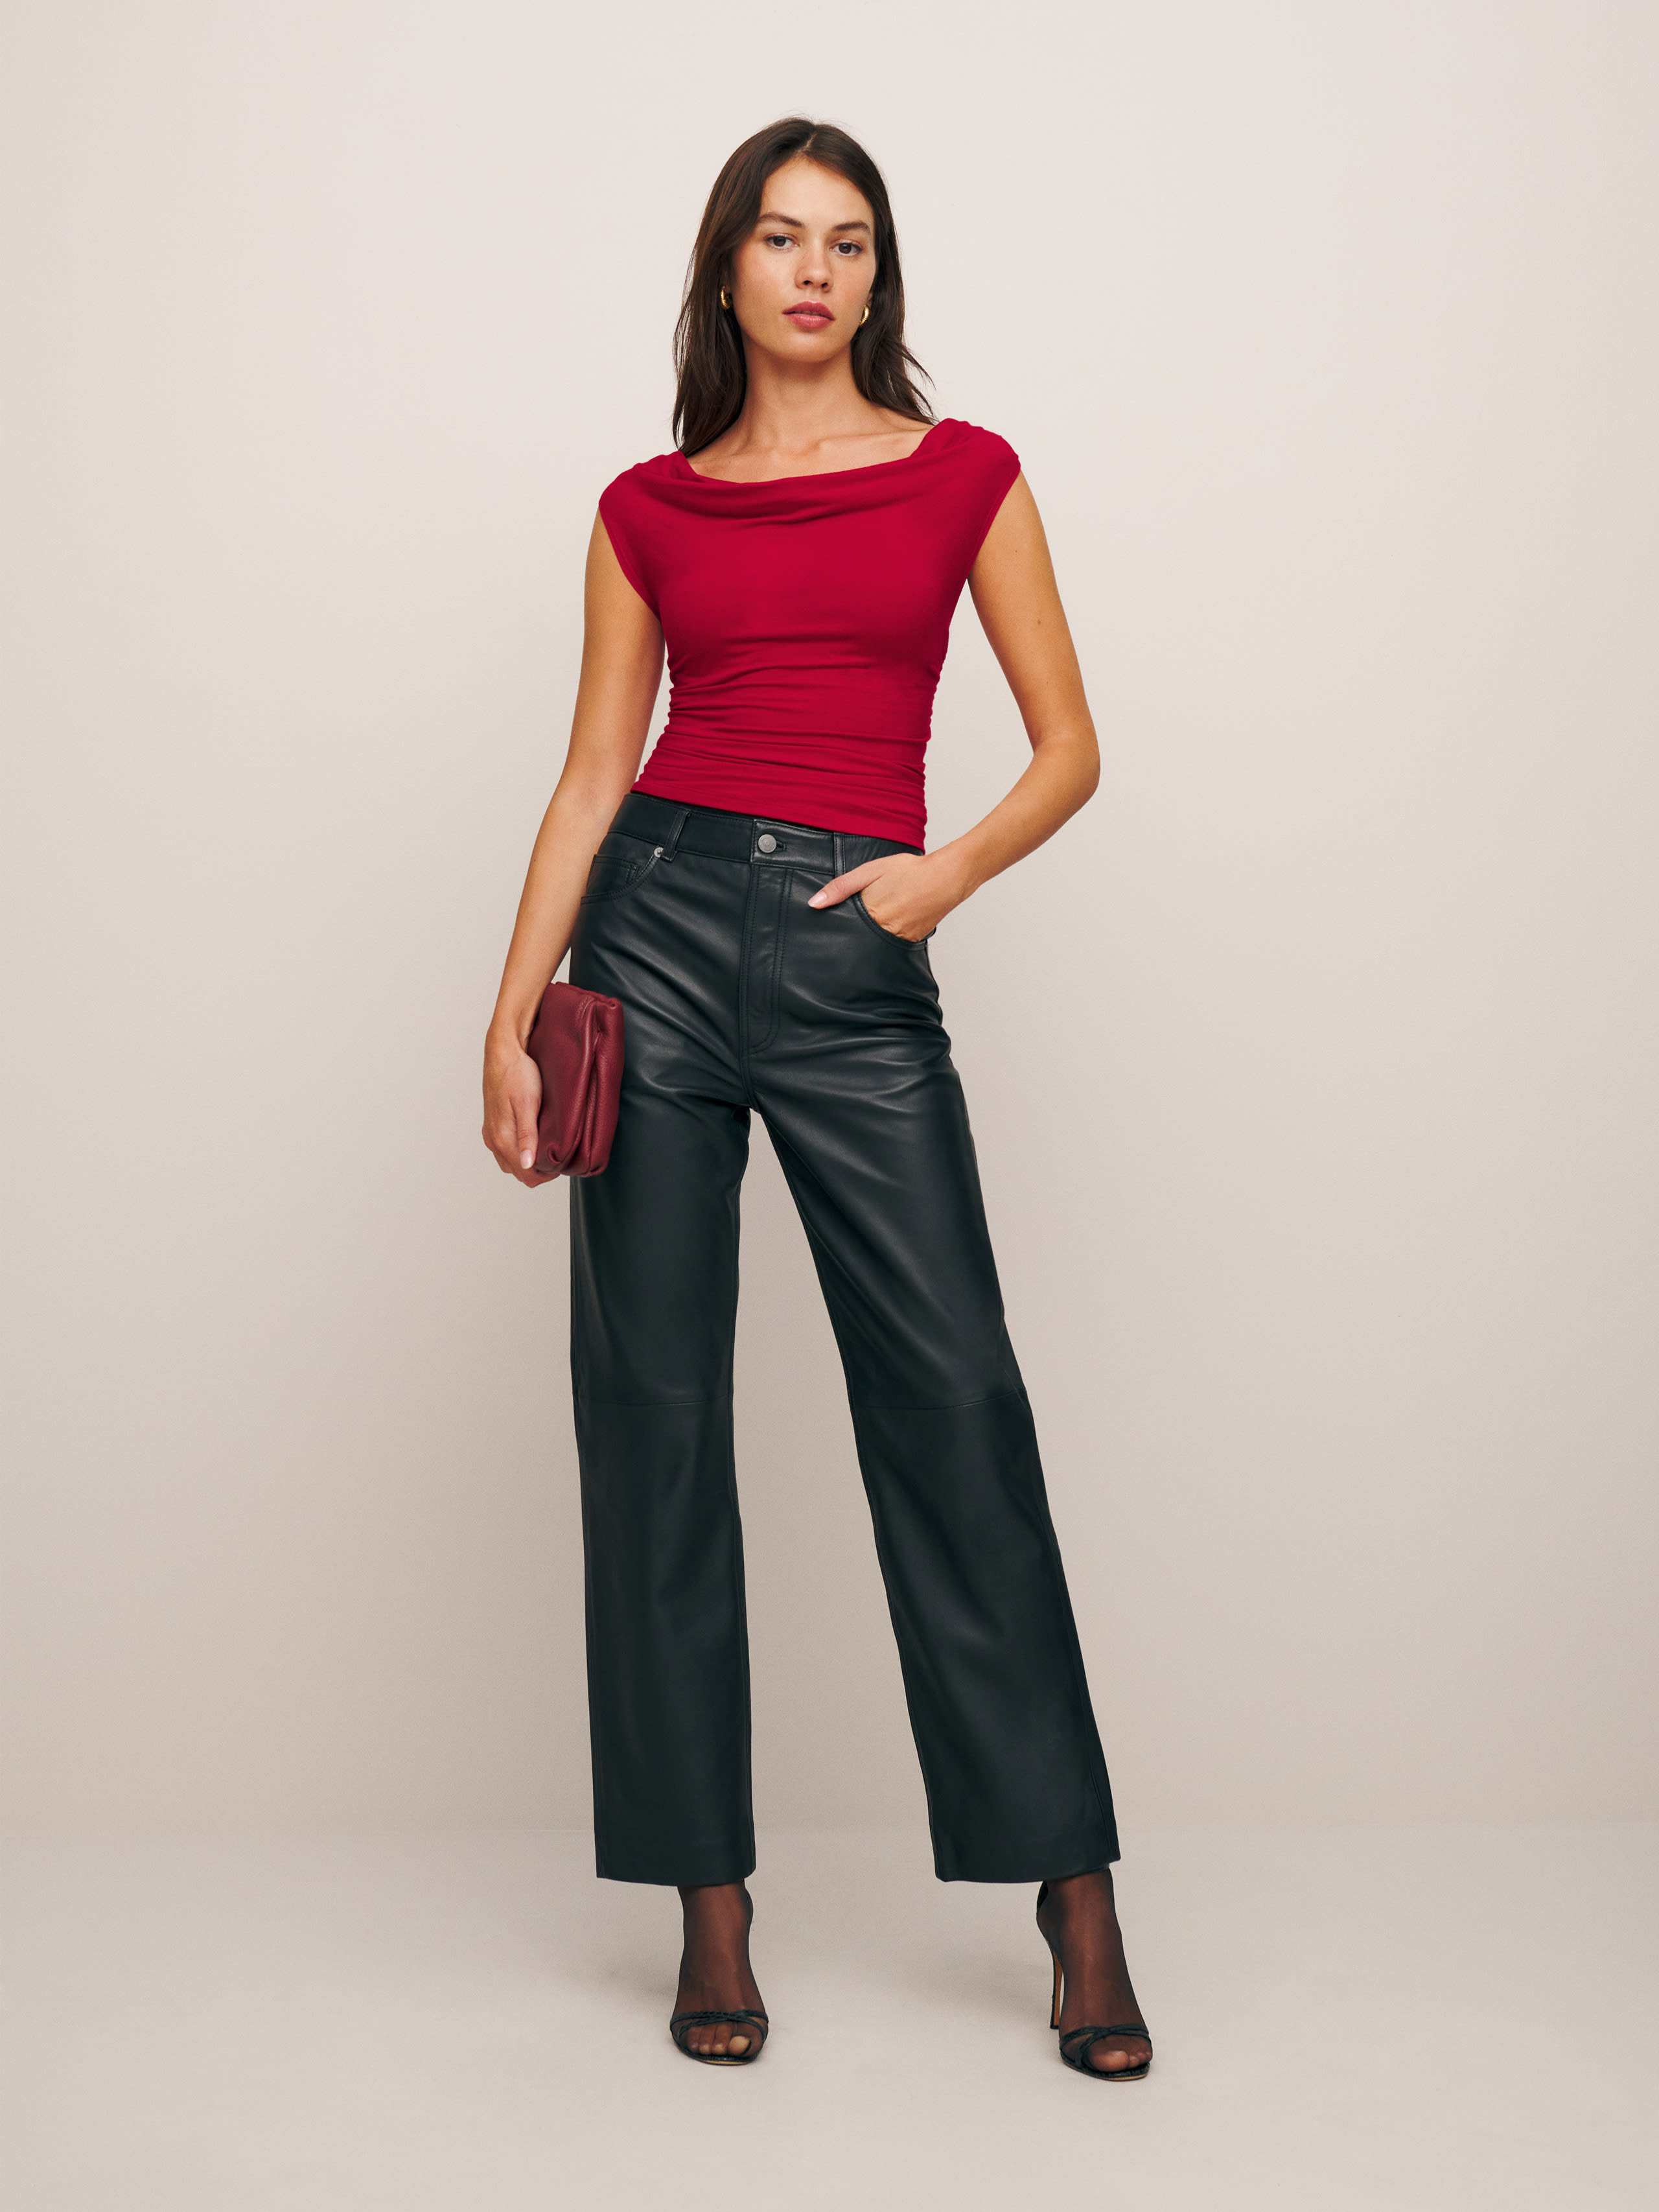 Reformation Darcy Knit Top In Red